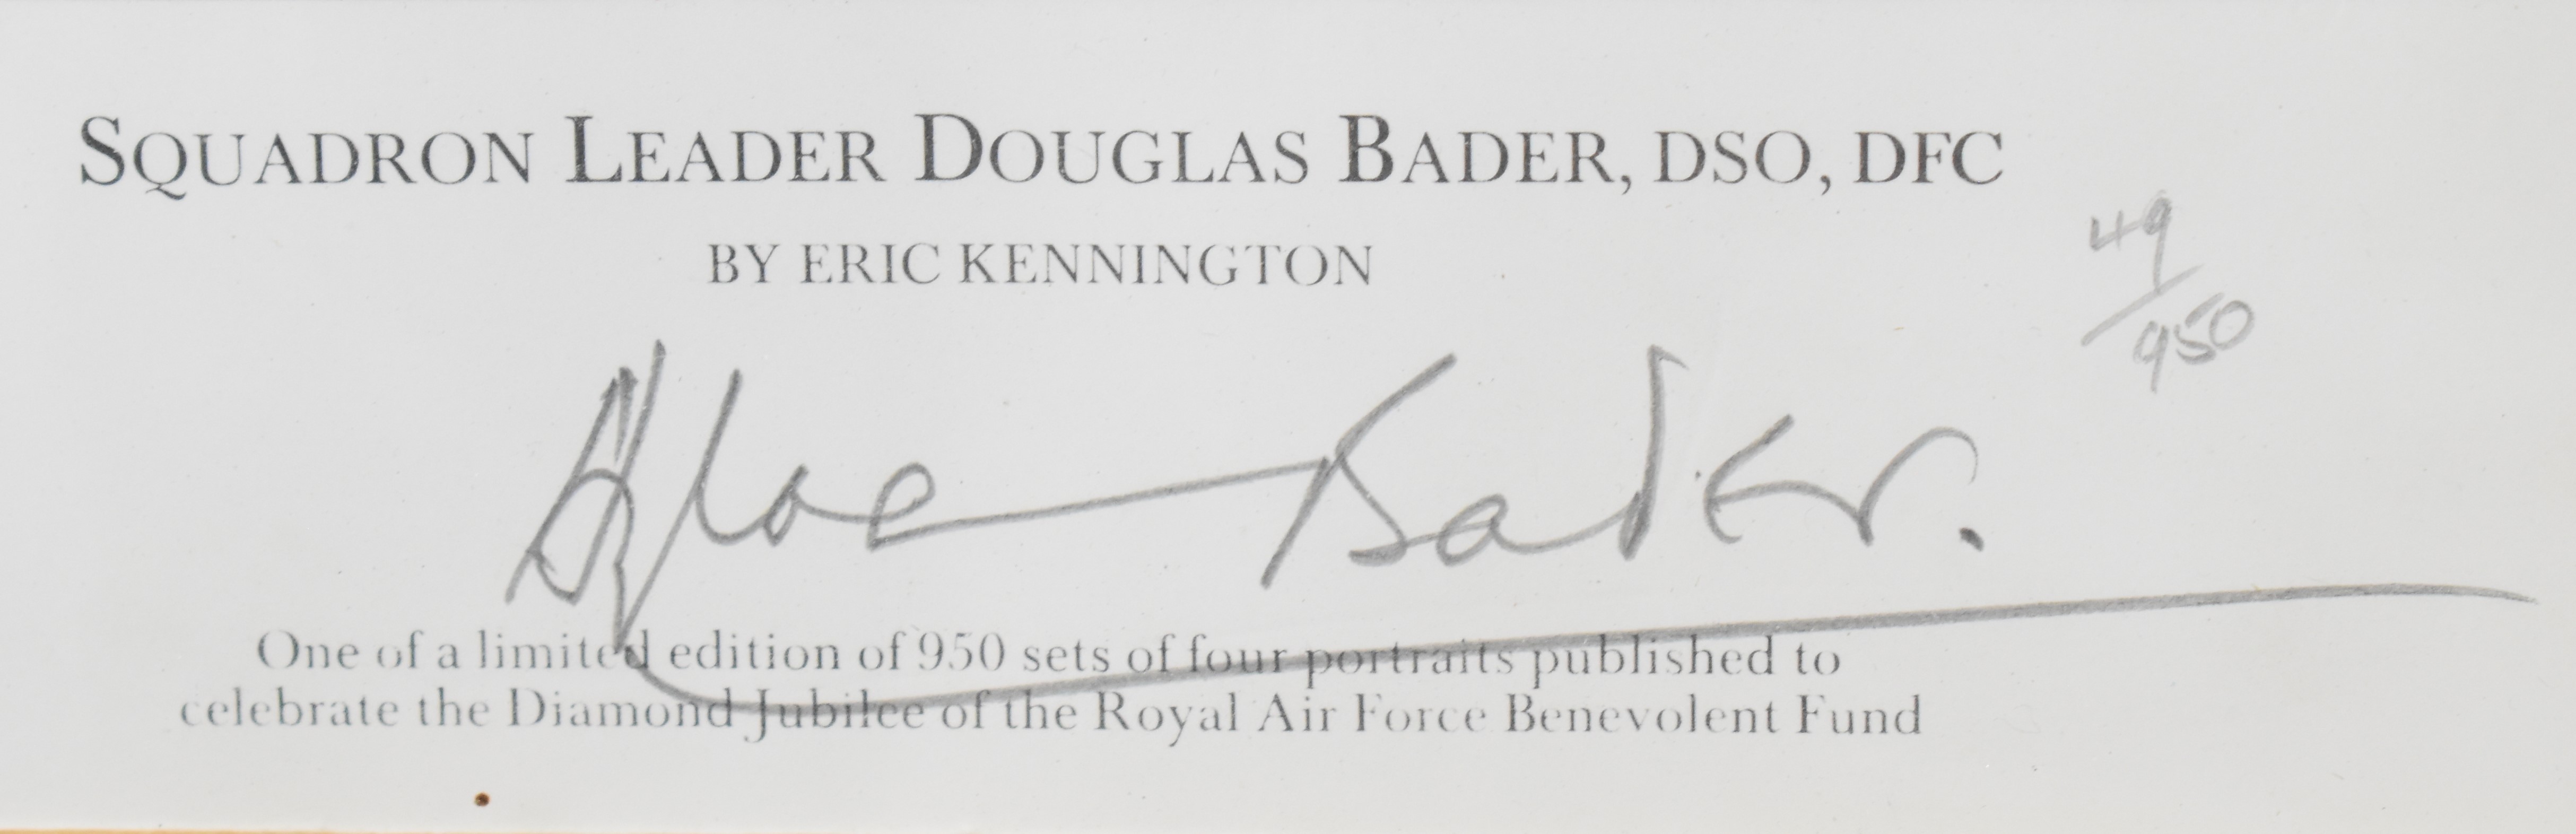 Four limited edition WW2 Royal Air Force portraits by Erick Kennington all signed by subjects, - Image 9 of 10